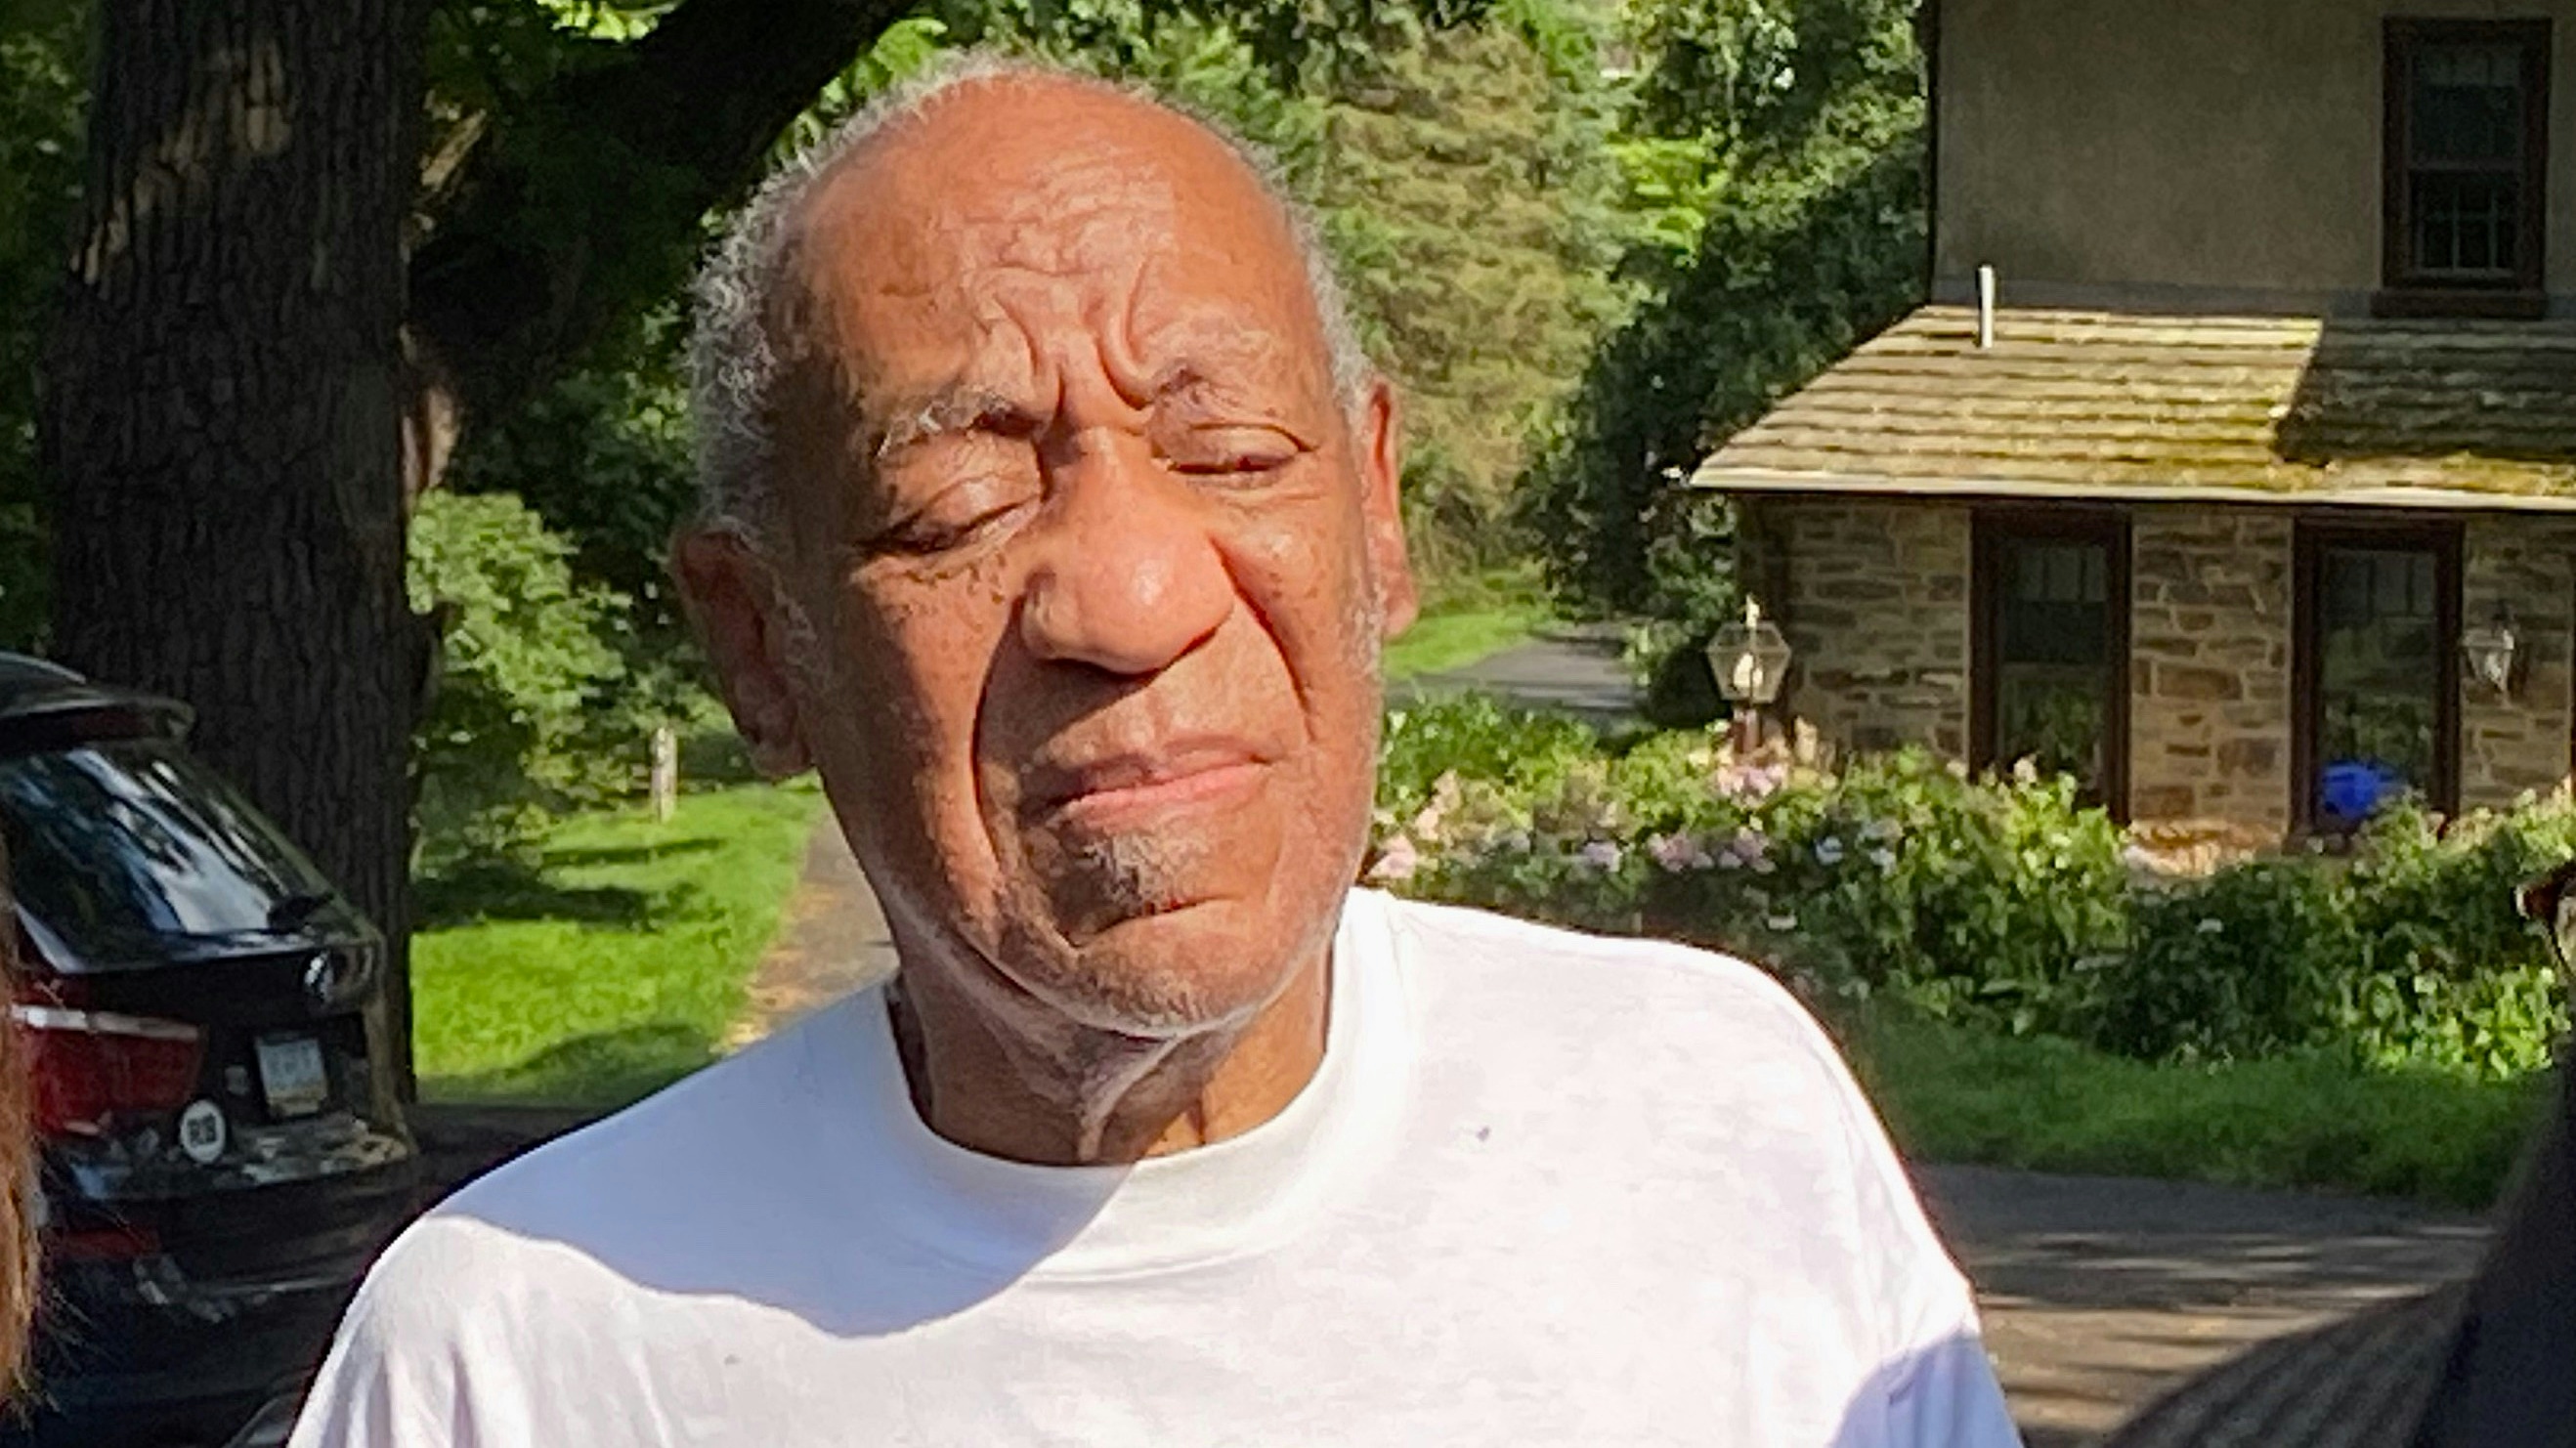 Bill Cosby speaks to reporters outside of his home.